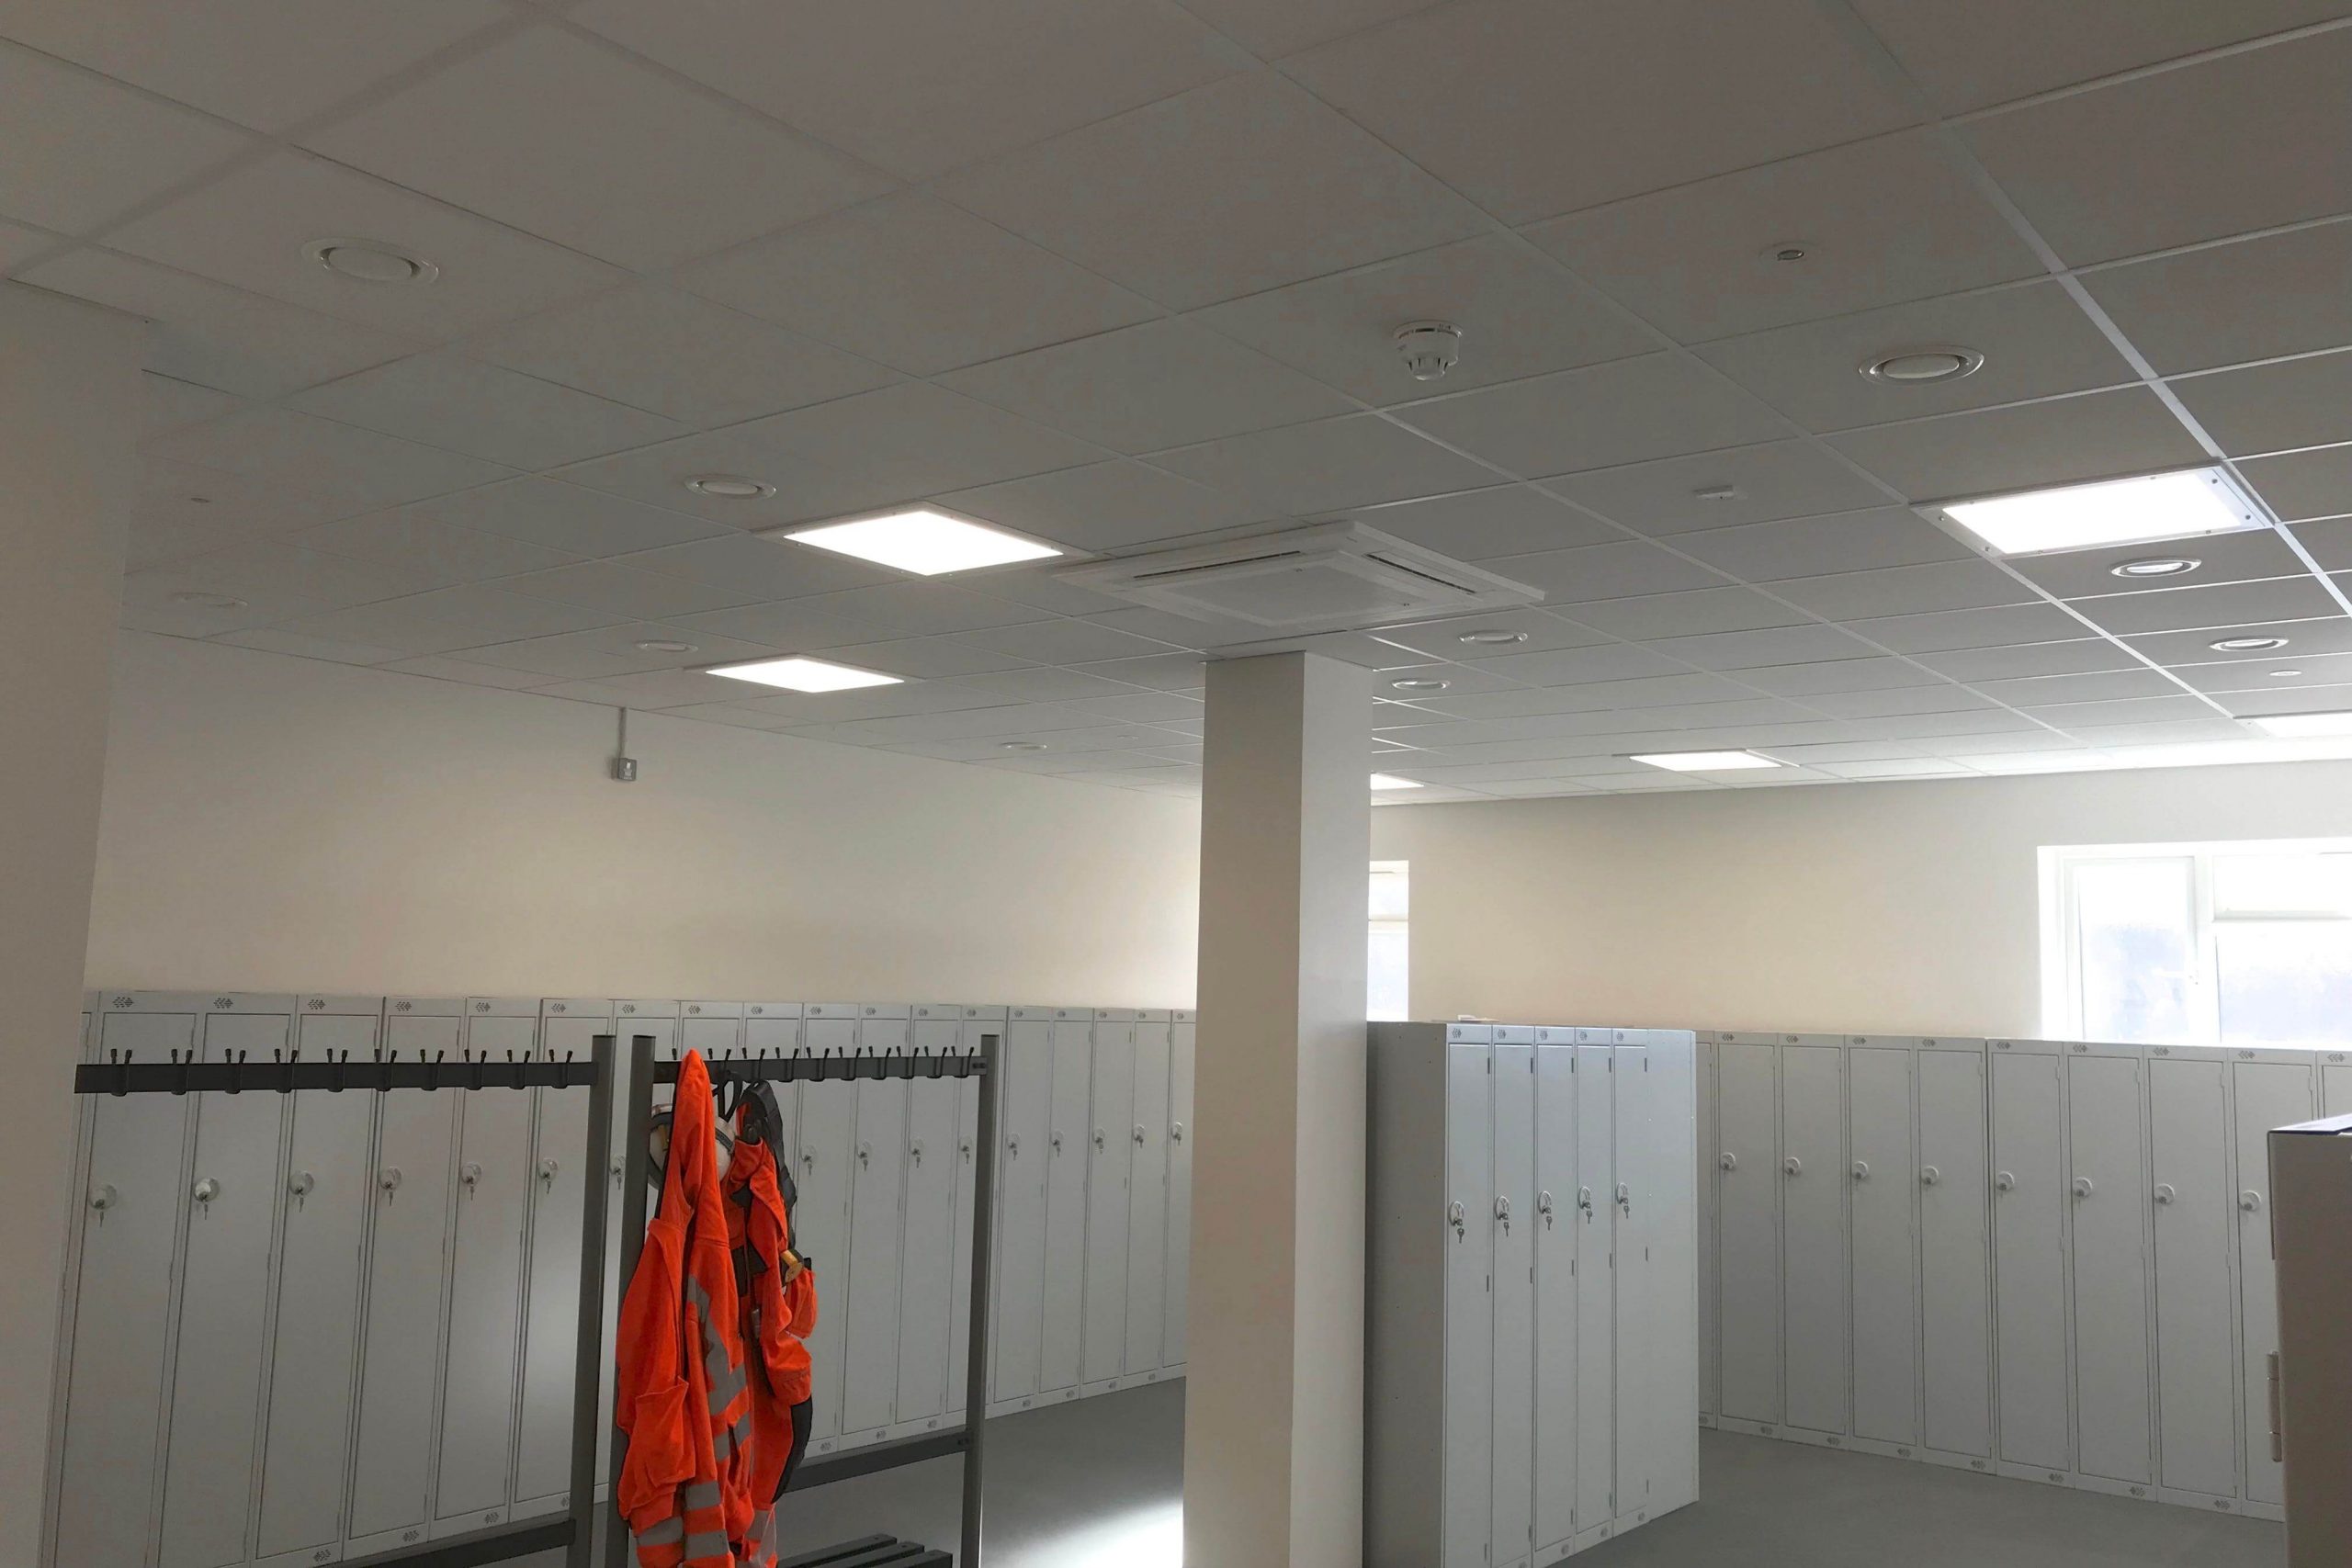 Norwood junction large commercial air conditioning solution by SubCool FM white ceiling cassette unit in locker room